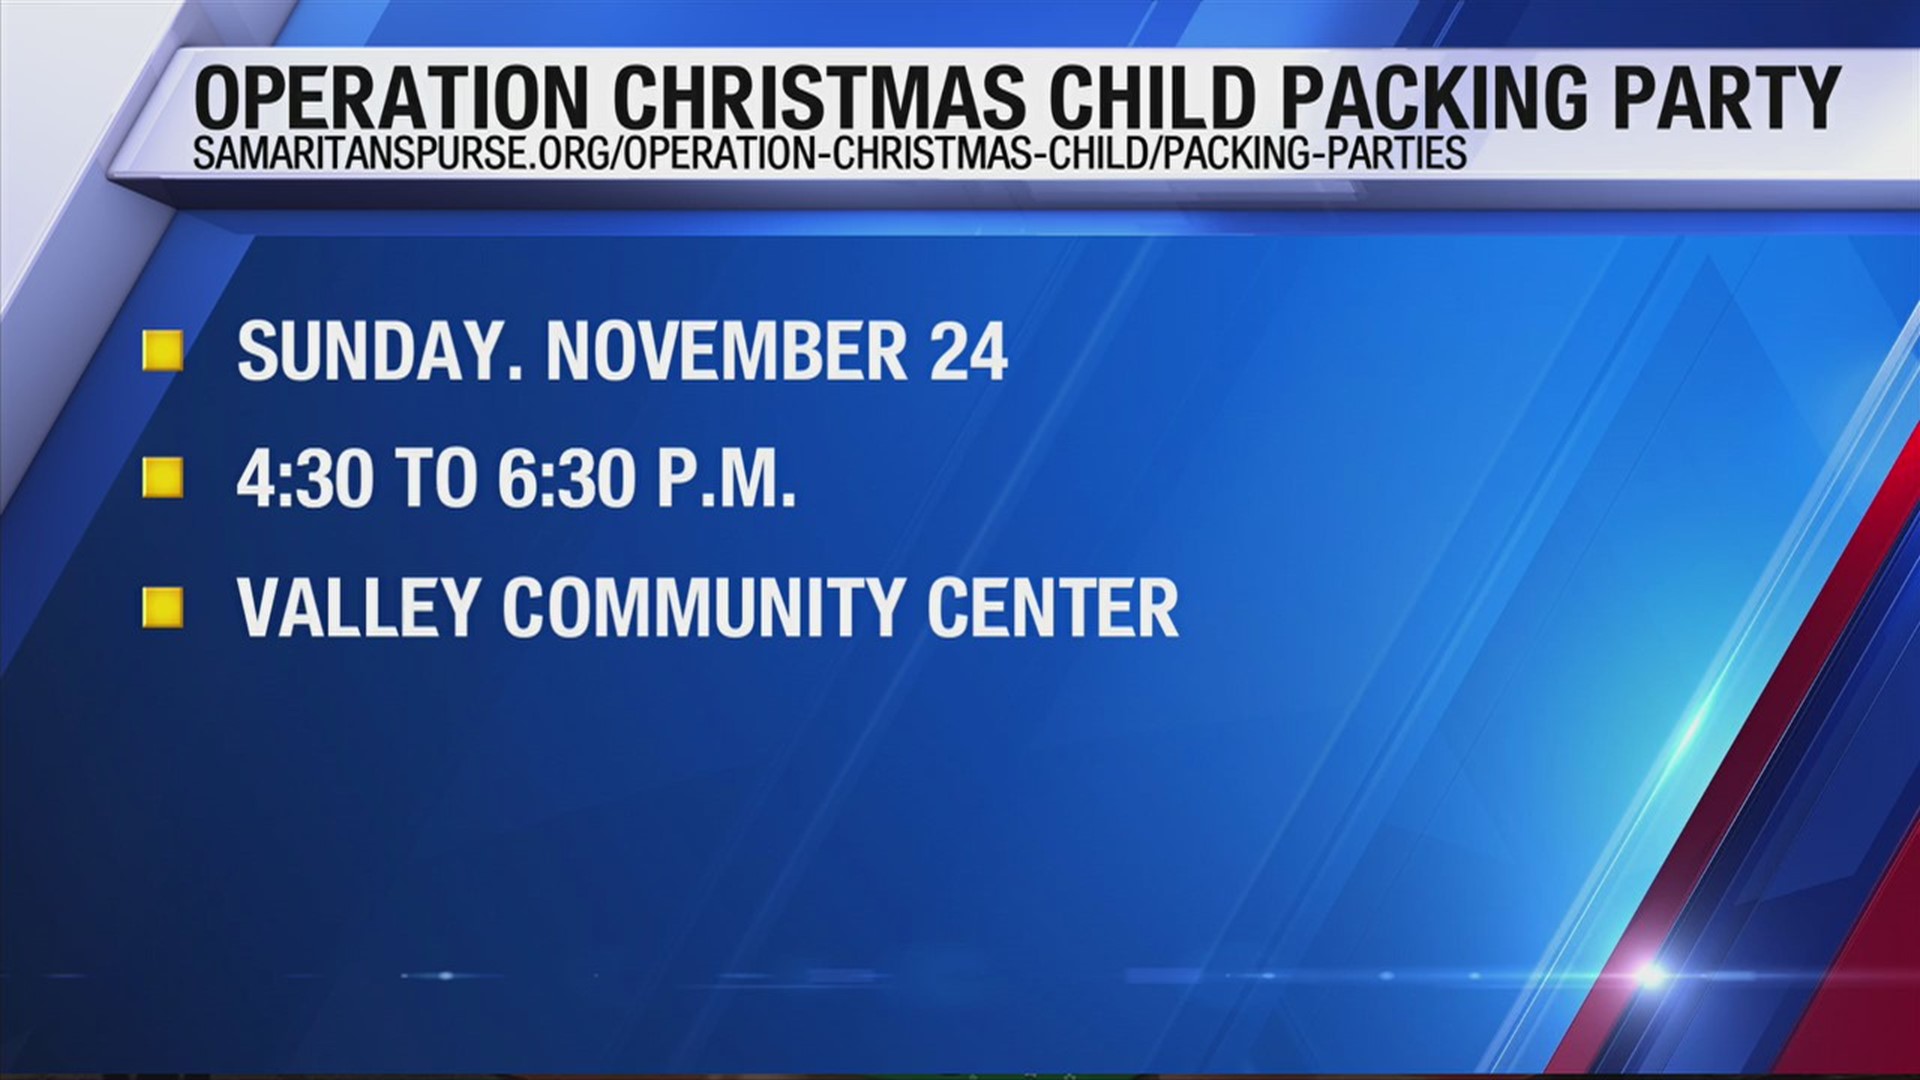 Samaritans Purse is calling on your help this weekend to help children in need all over the world as they host an Operation Christmas Child packing party.